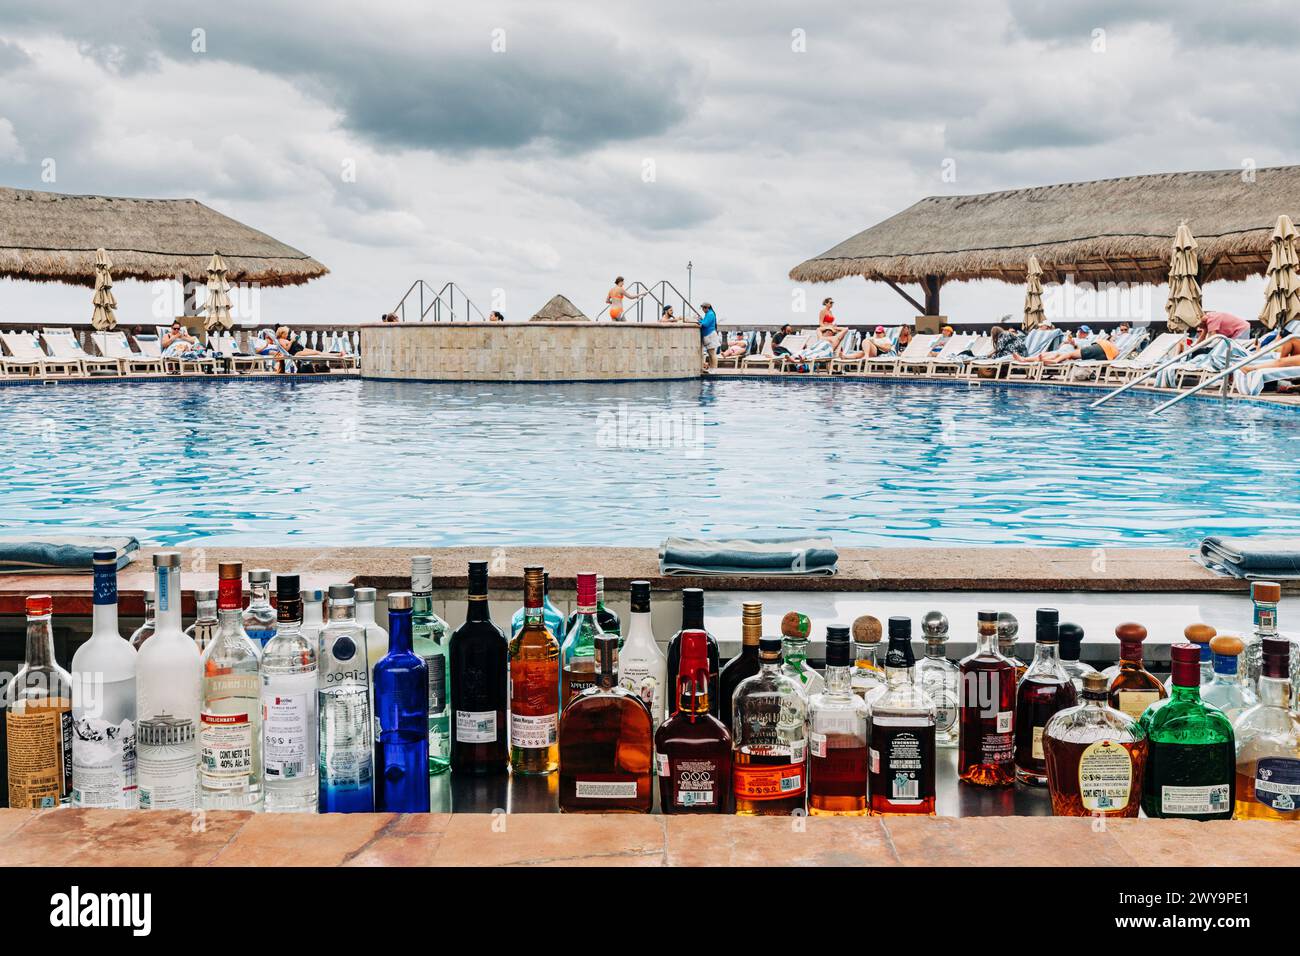 Poolside bar with liquor bottles at Cancun resort Stock Photo